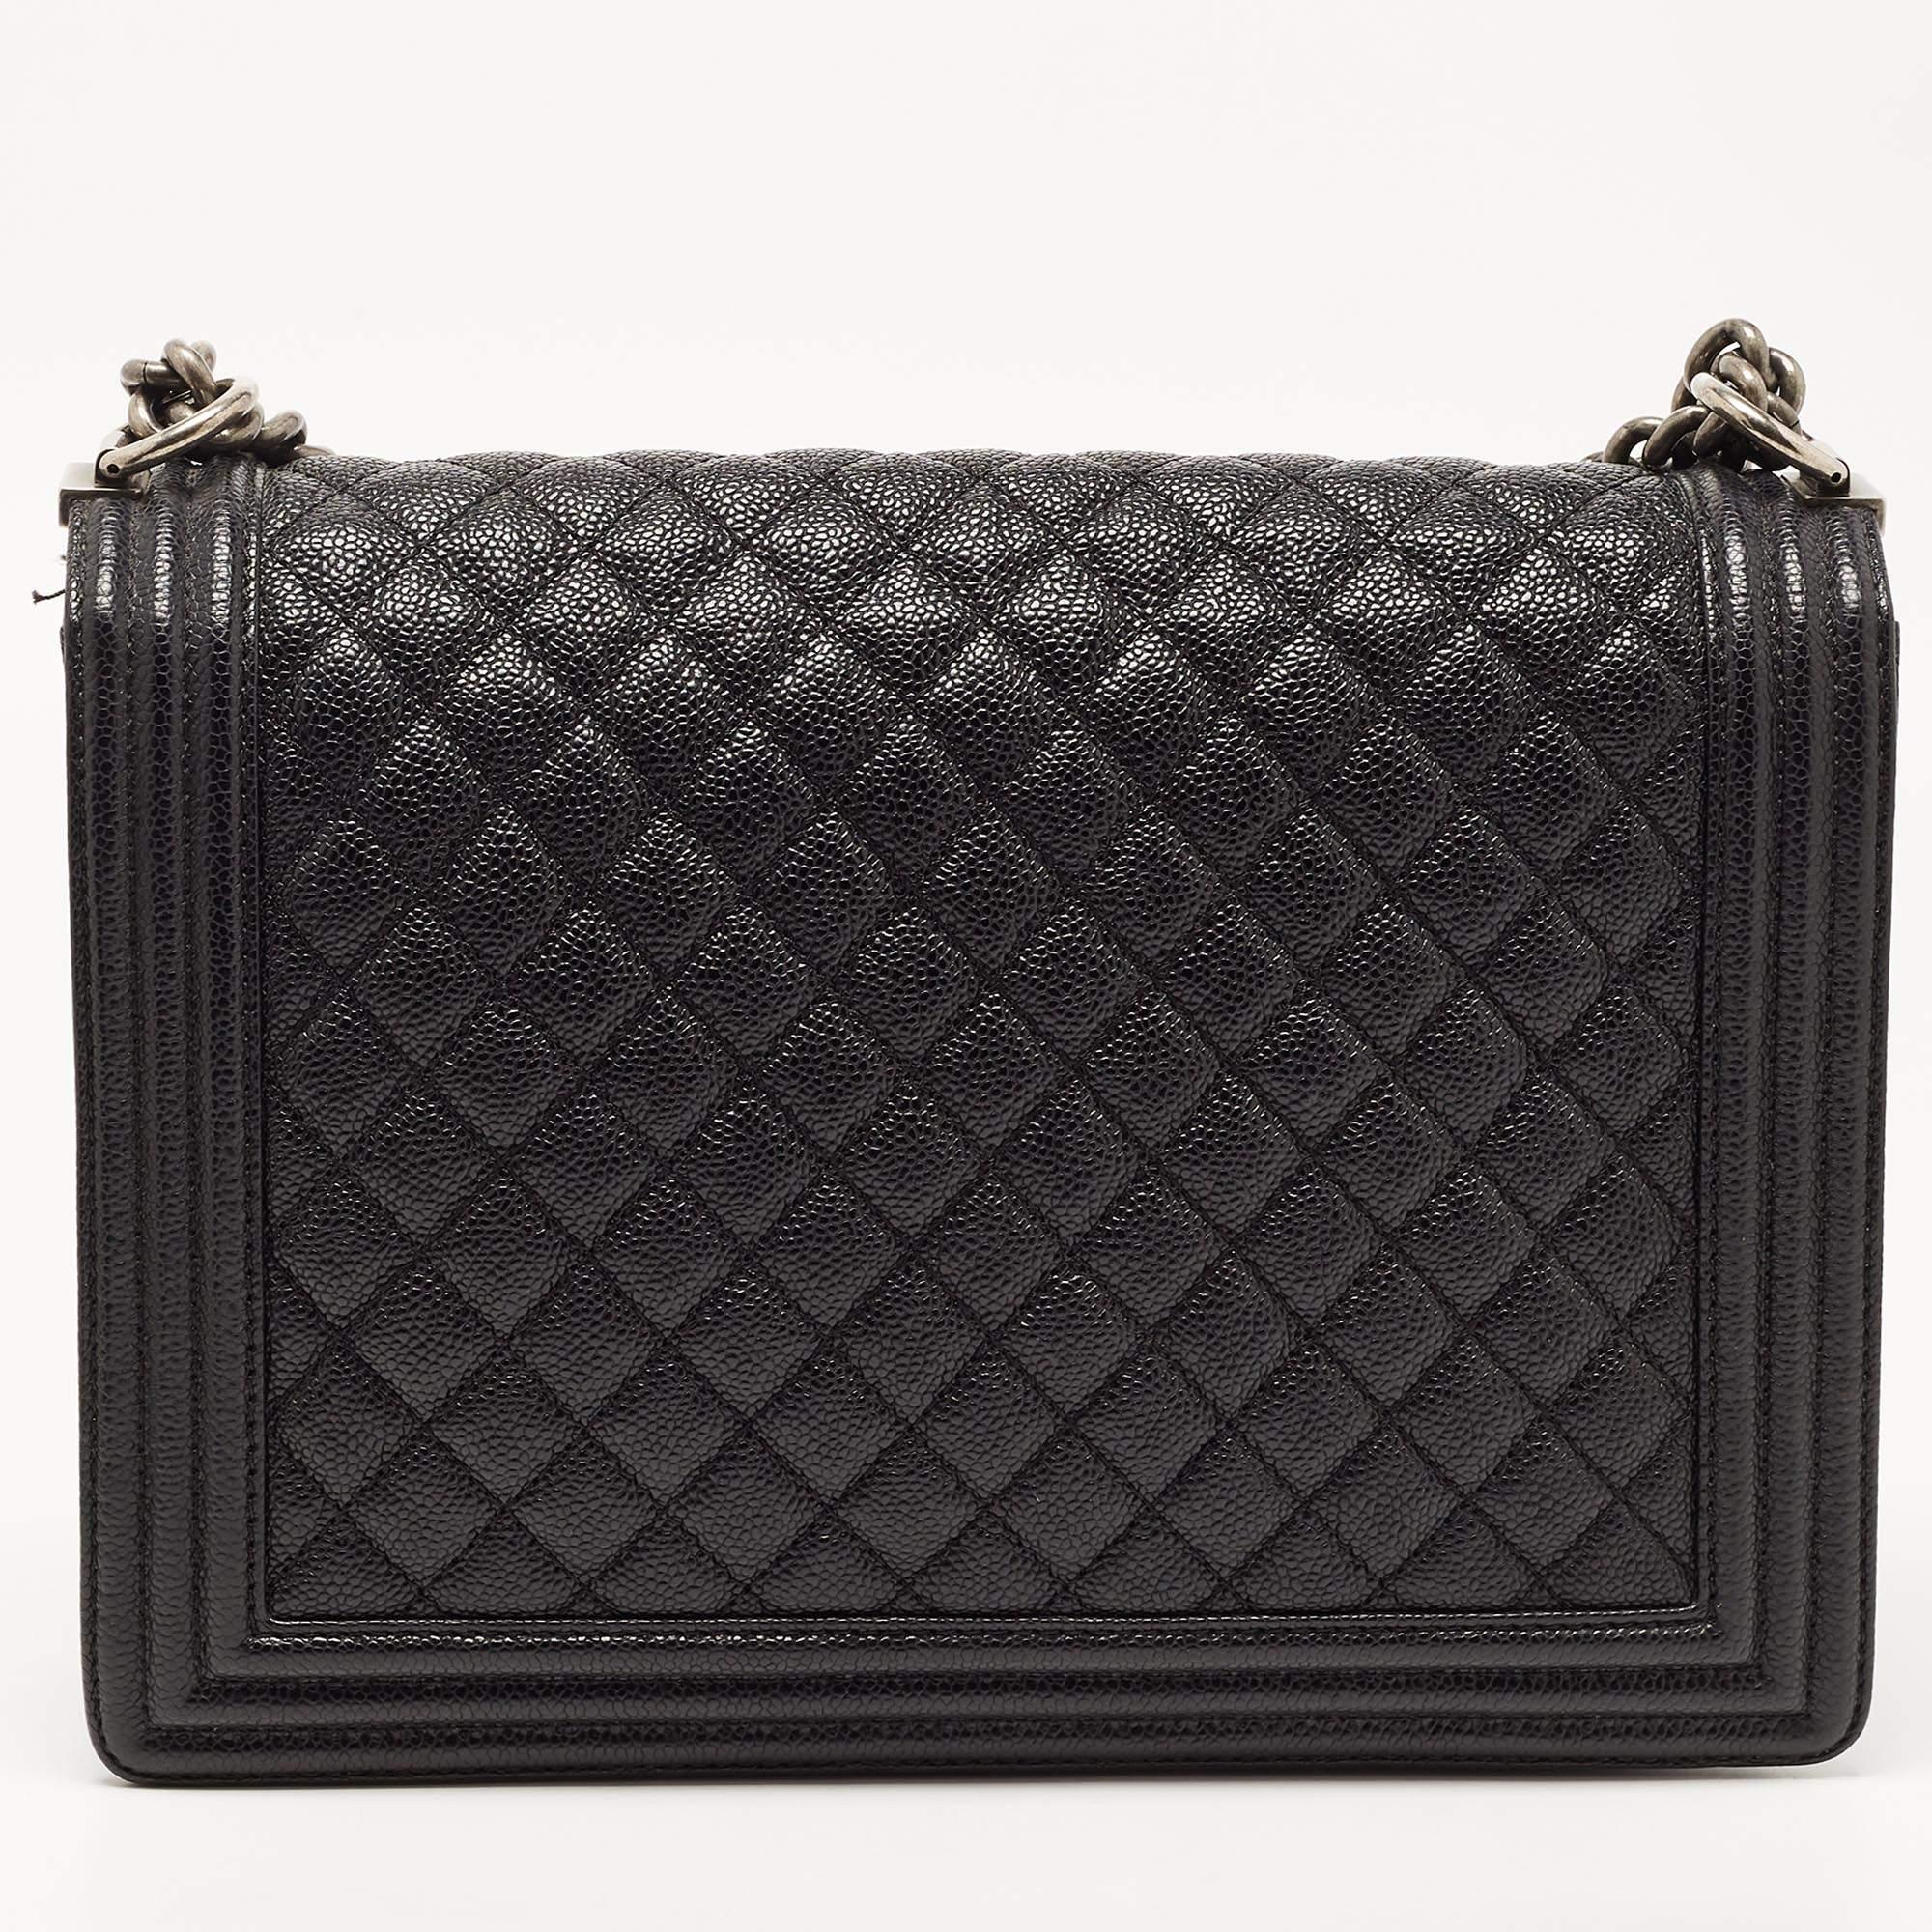 The house of Chanel offers this beautiful creation to help you create timeless style edits every season. Crafted with quality materials, this piece will last you a long time.

Includes: Original Dustbag
